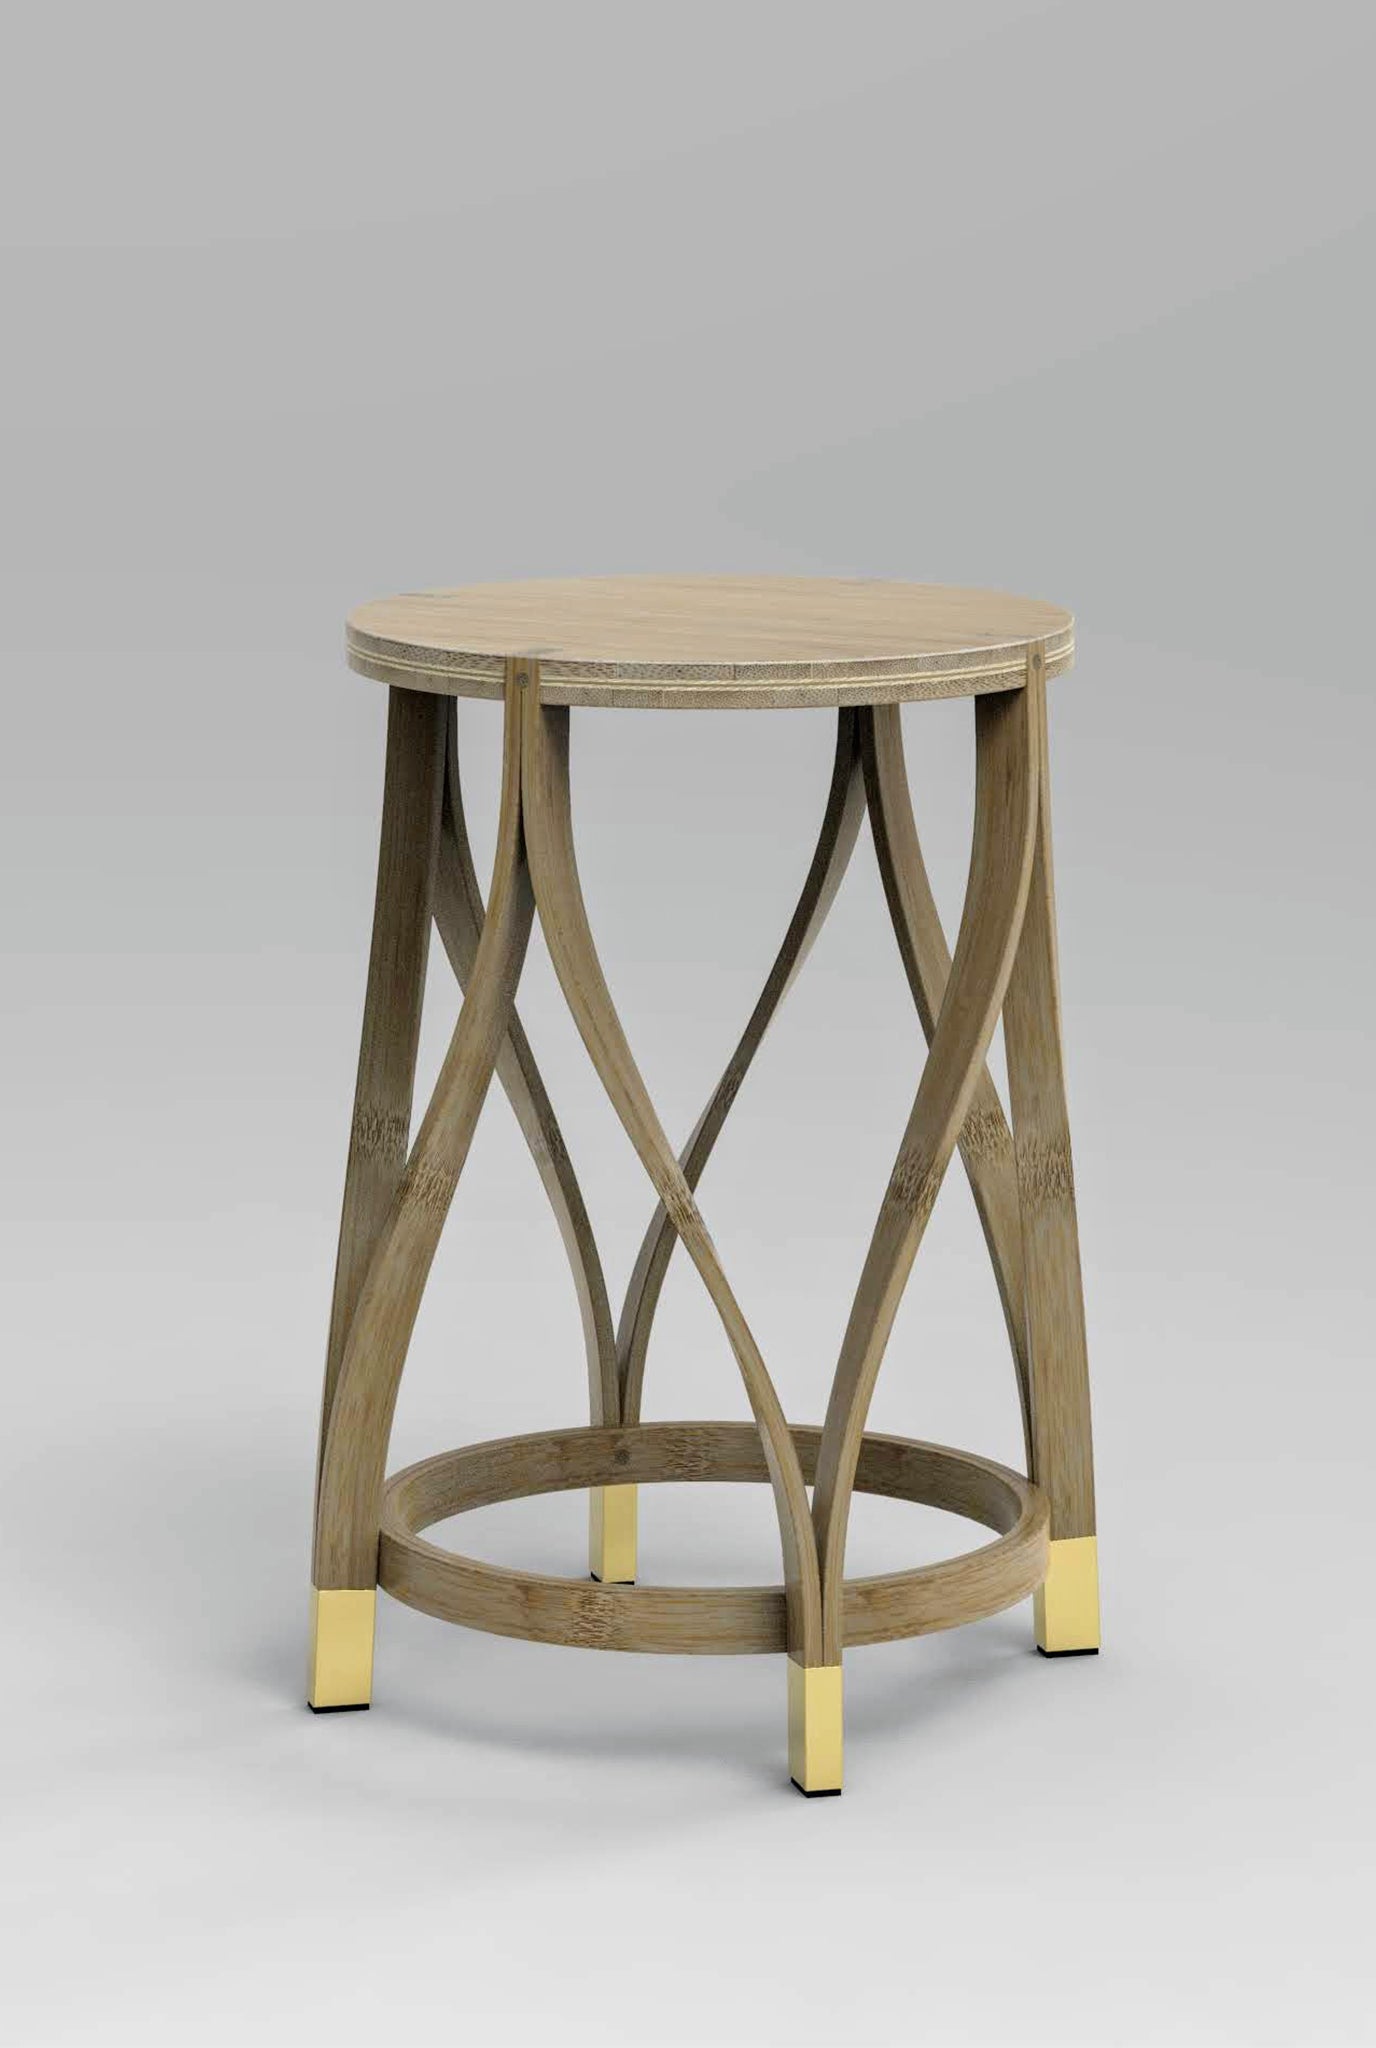 handcrafted-sustainable-bamboo-stool-side table-jodi